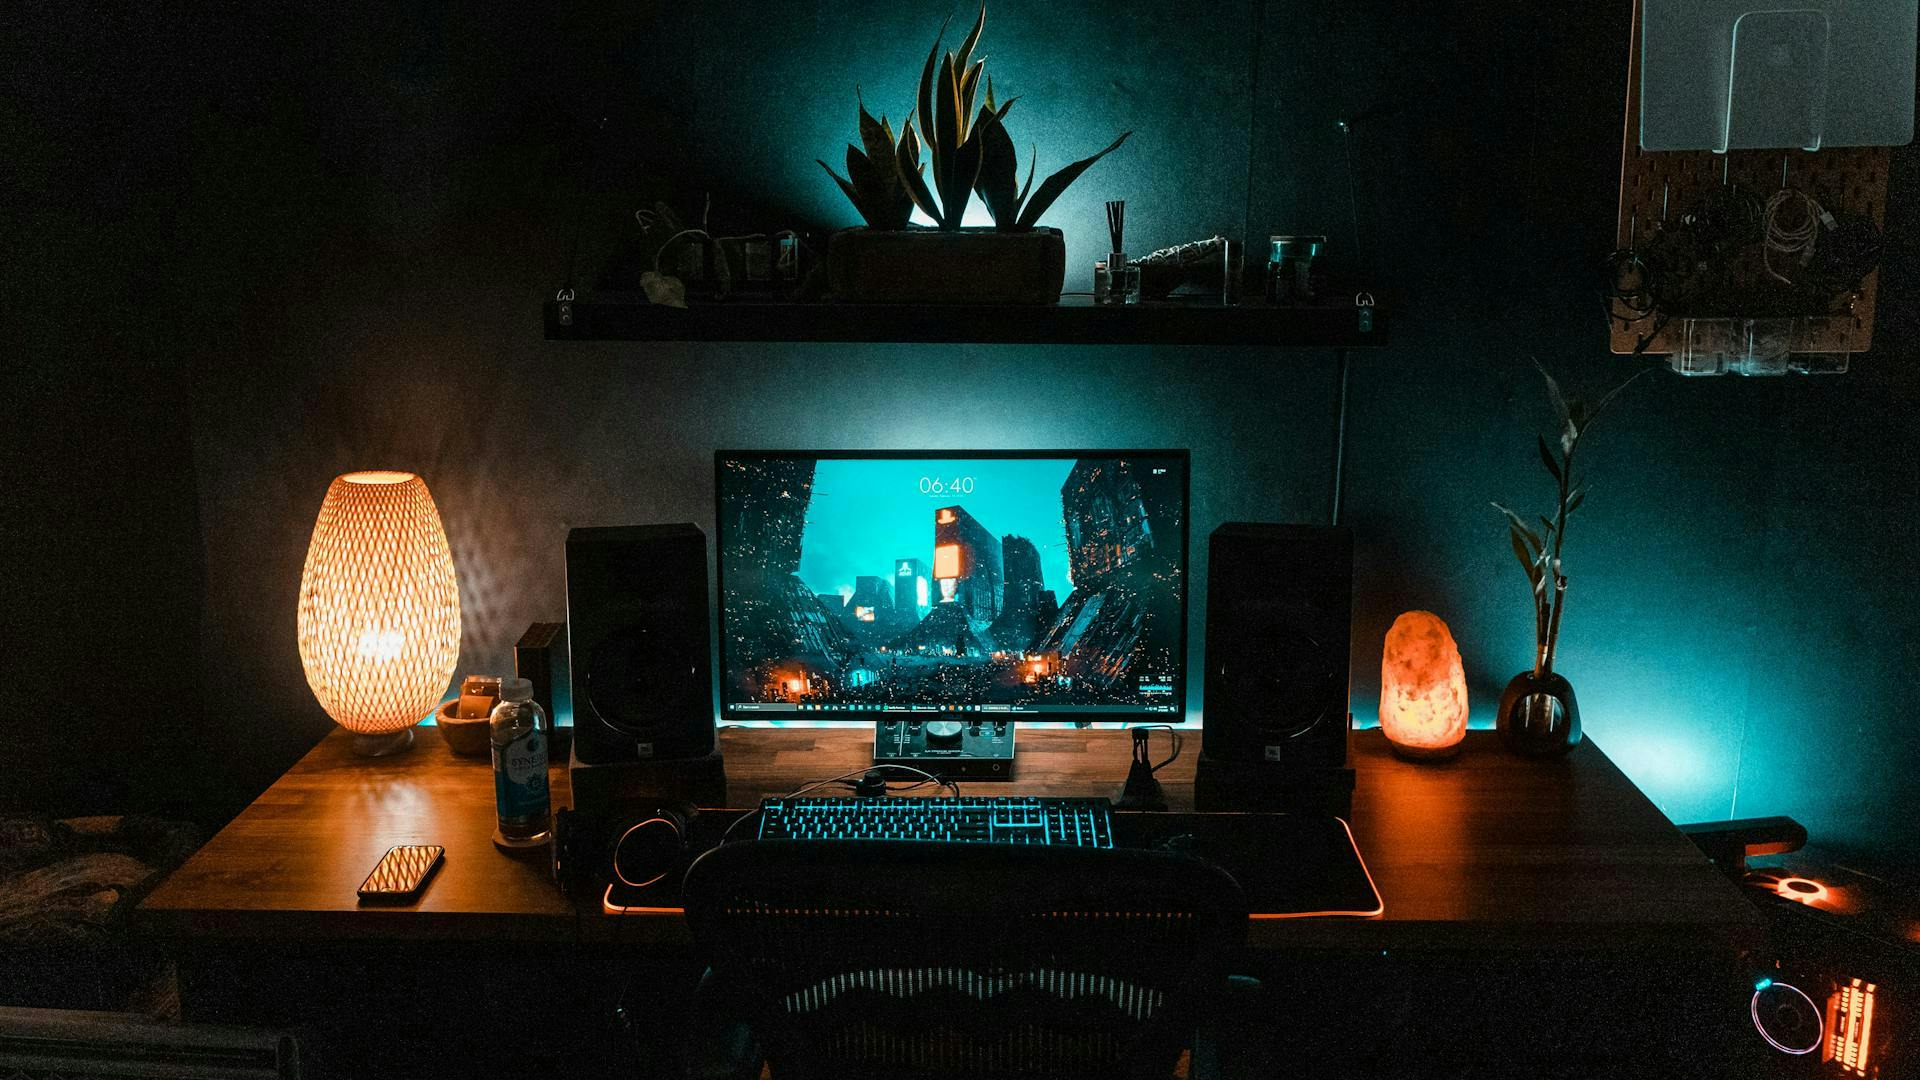 A dark room is coherently illuminated by turquoise and orange light elements in the gaming setup